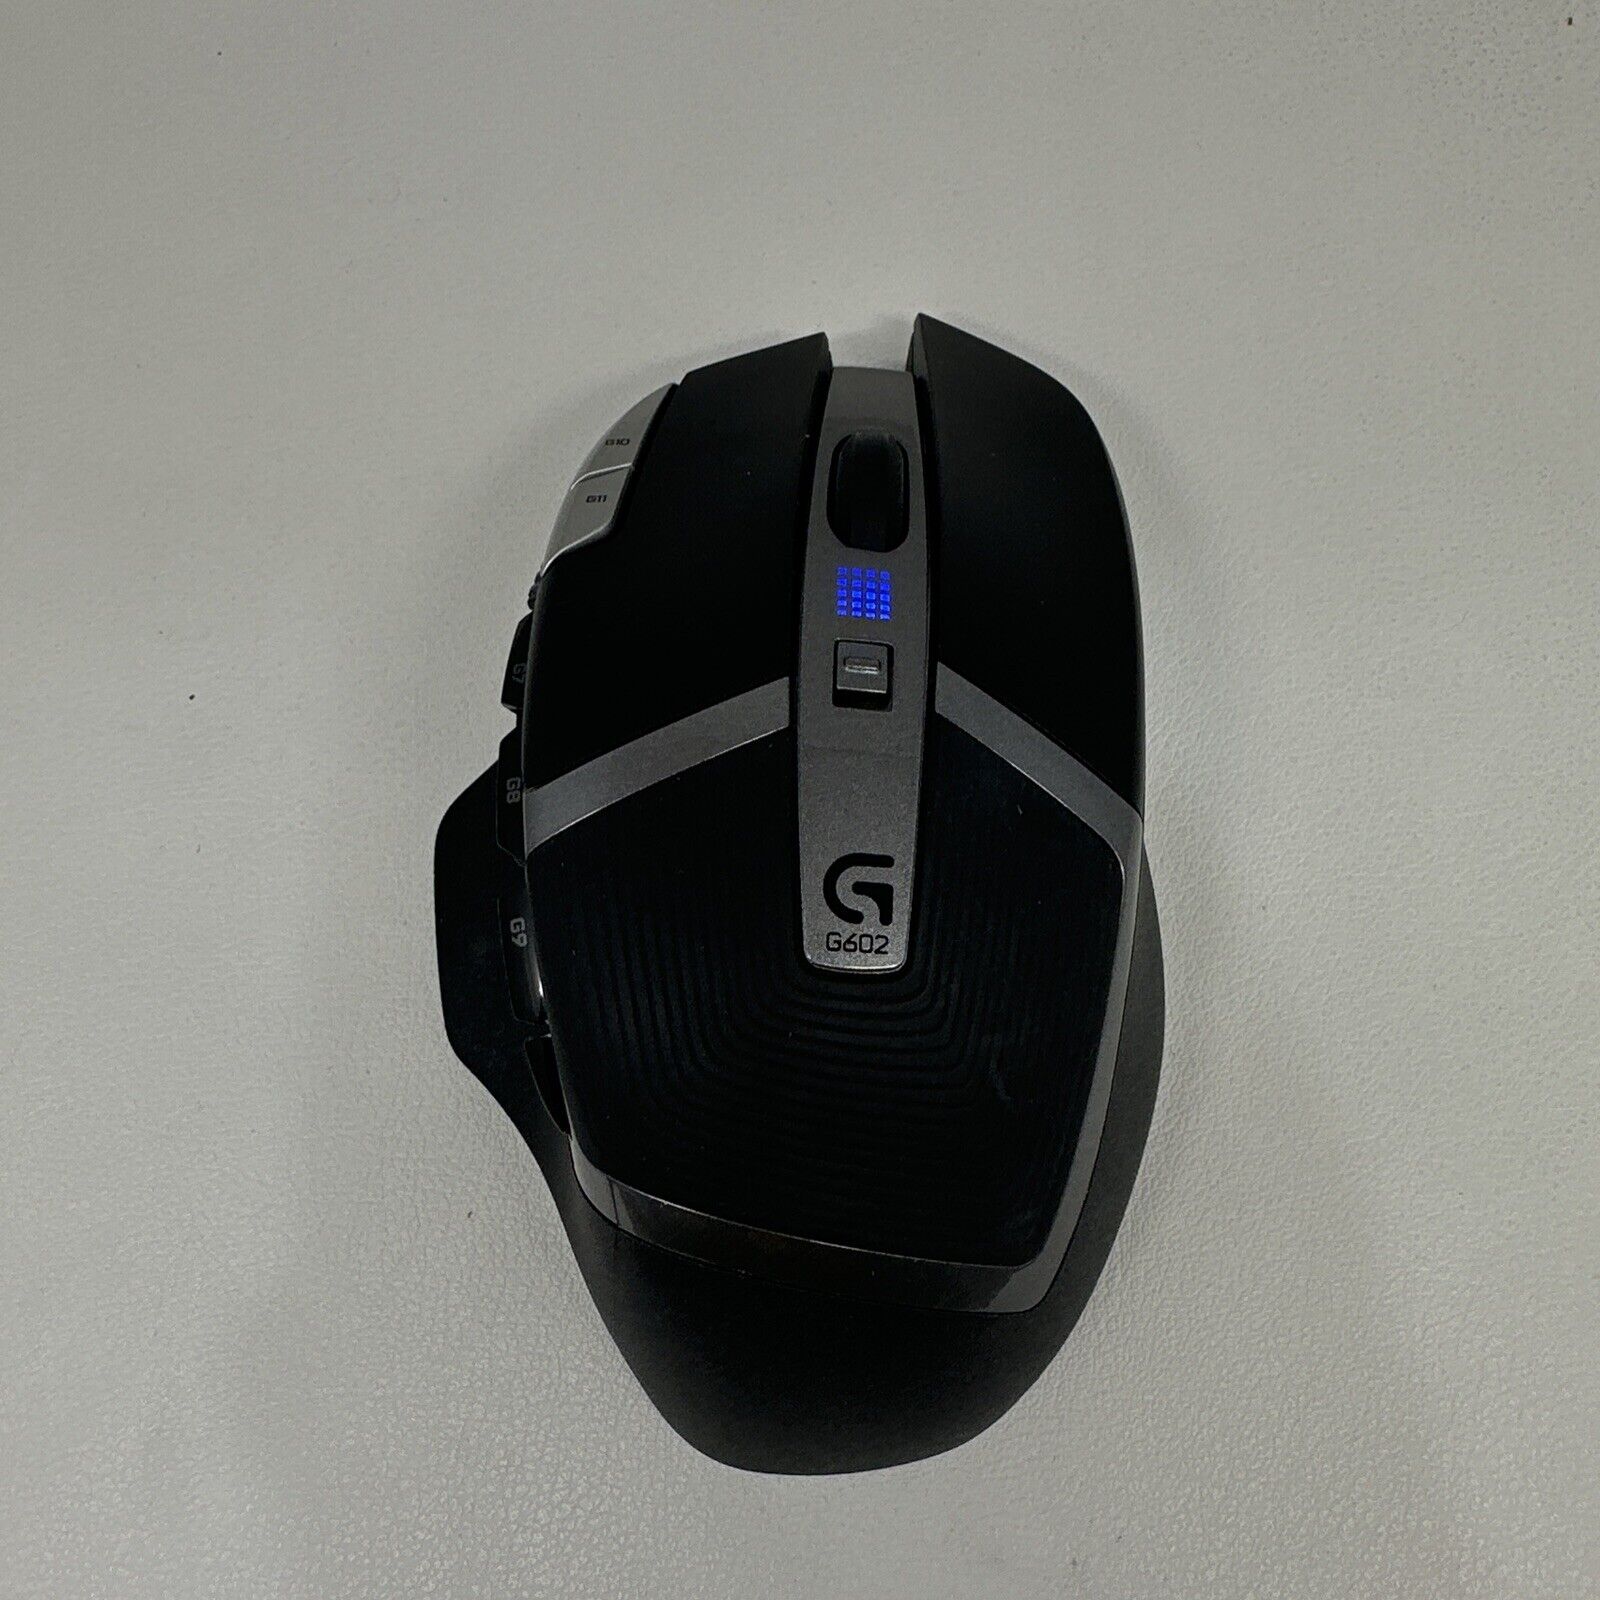 Logitech G602 Wireless Gaming Mouse (No dongle/cable) Mouse Turns On Not Tested